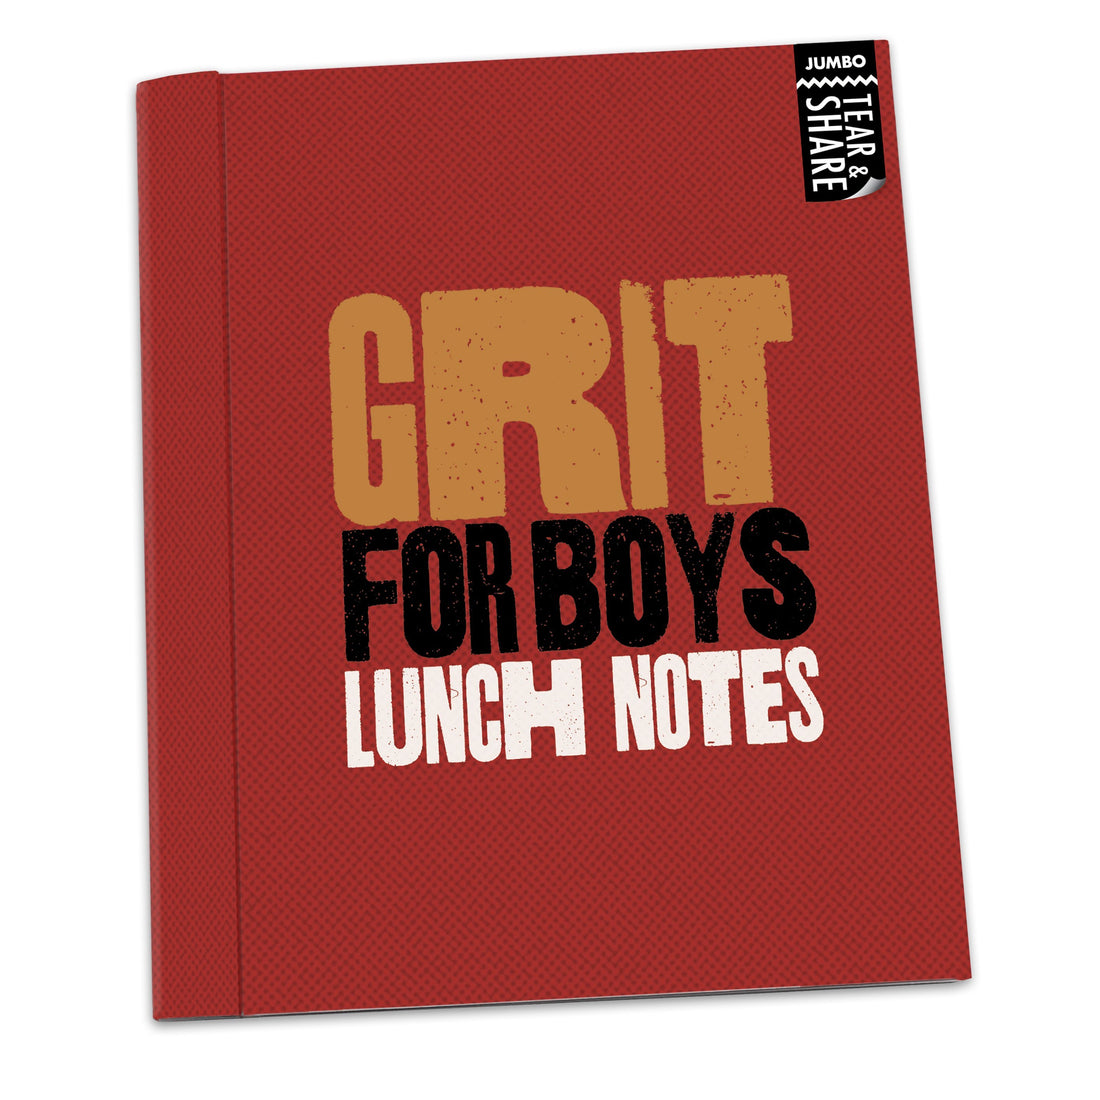 Grit for Boys - Jumbo Tear and Share Lunch Notes for Teen Boys